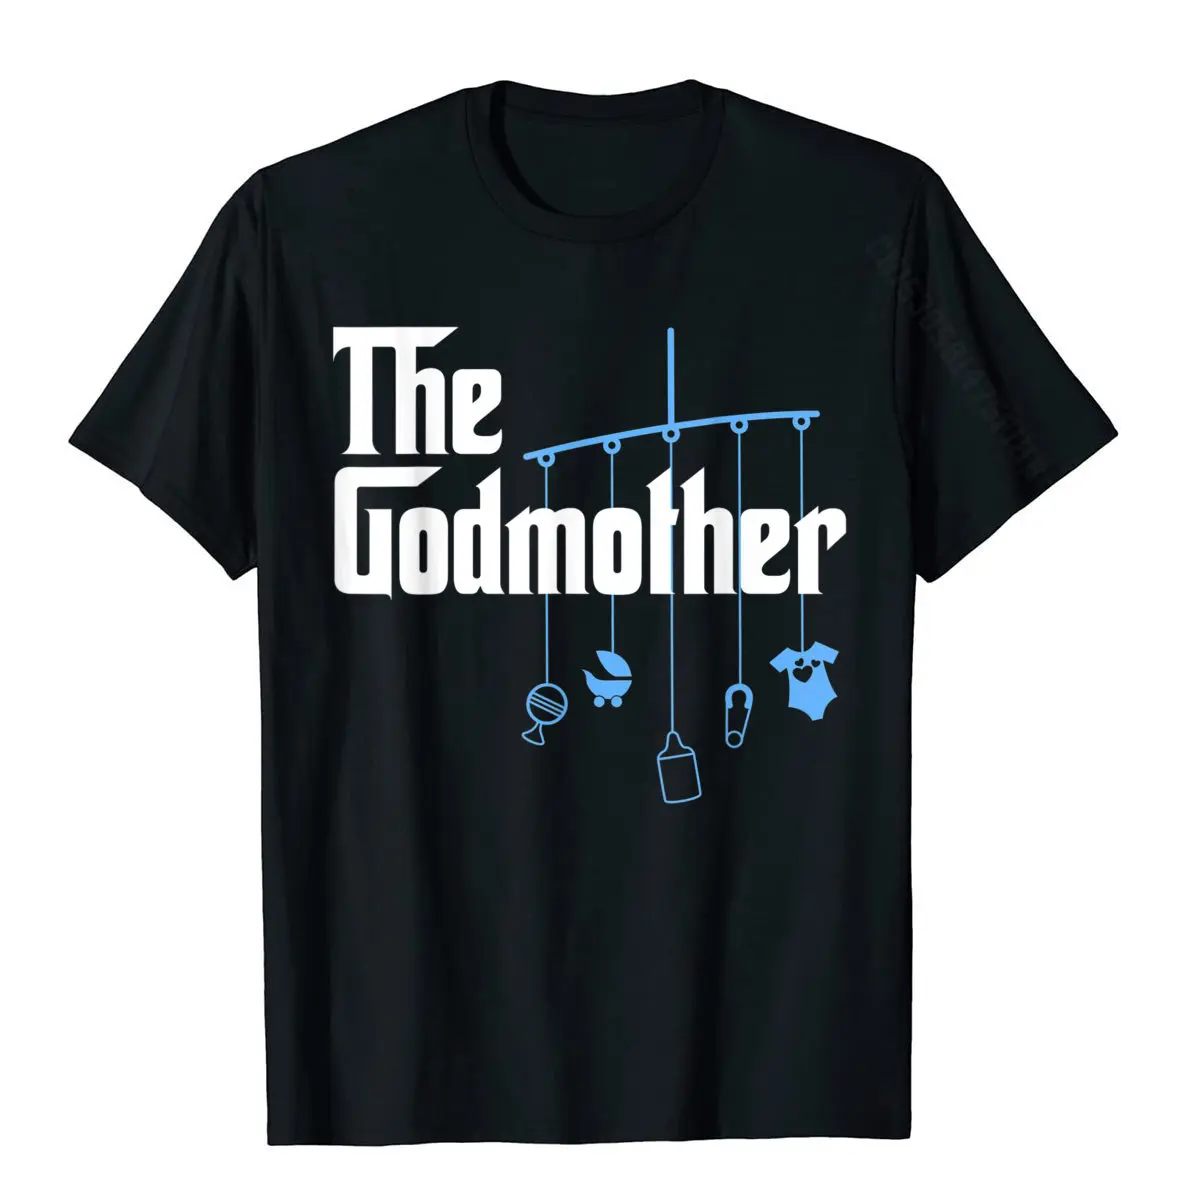 The Godmother Of New Baby Boy Funny Pun Gift T-Shirt Europe Tshirts For Men Cotton Tops & Tees Custom Plain